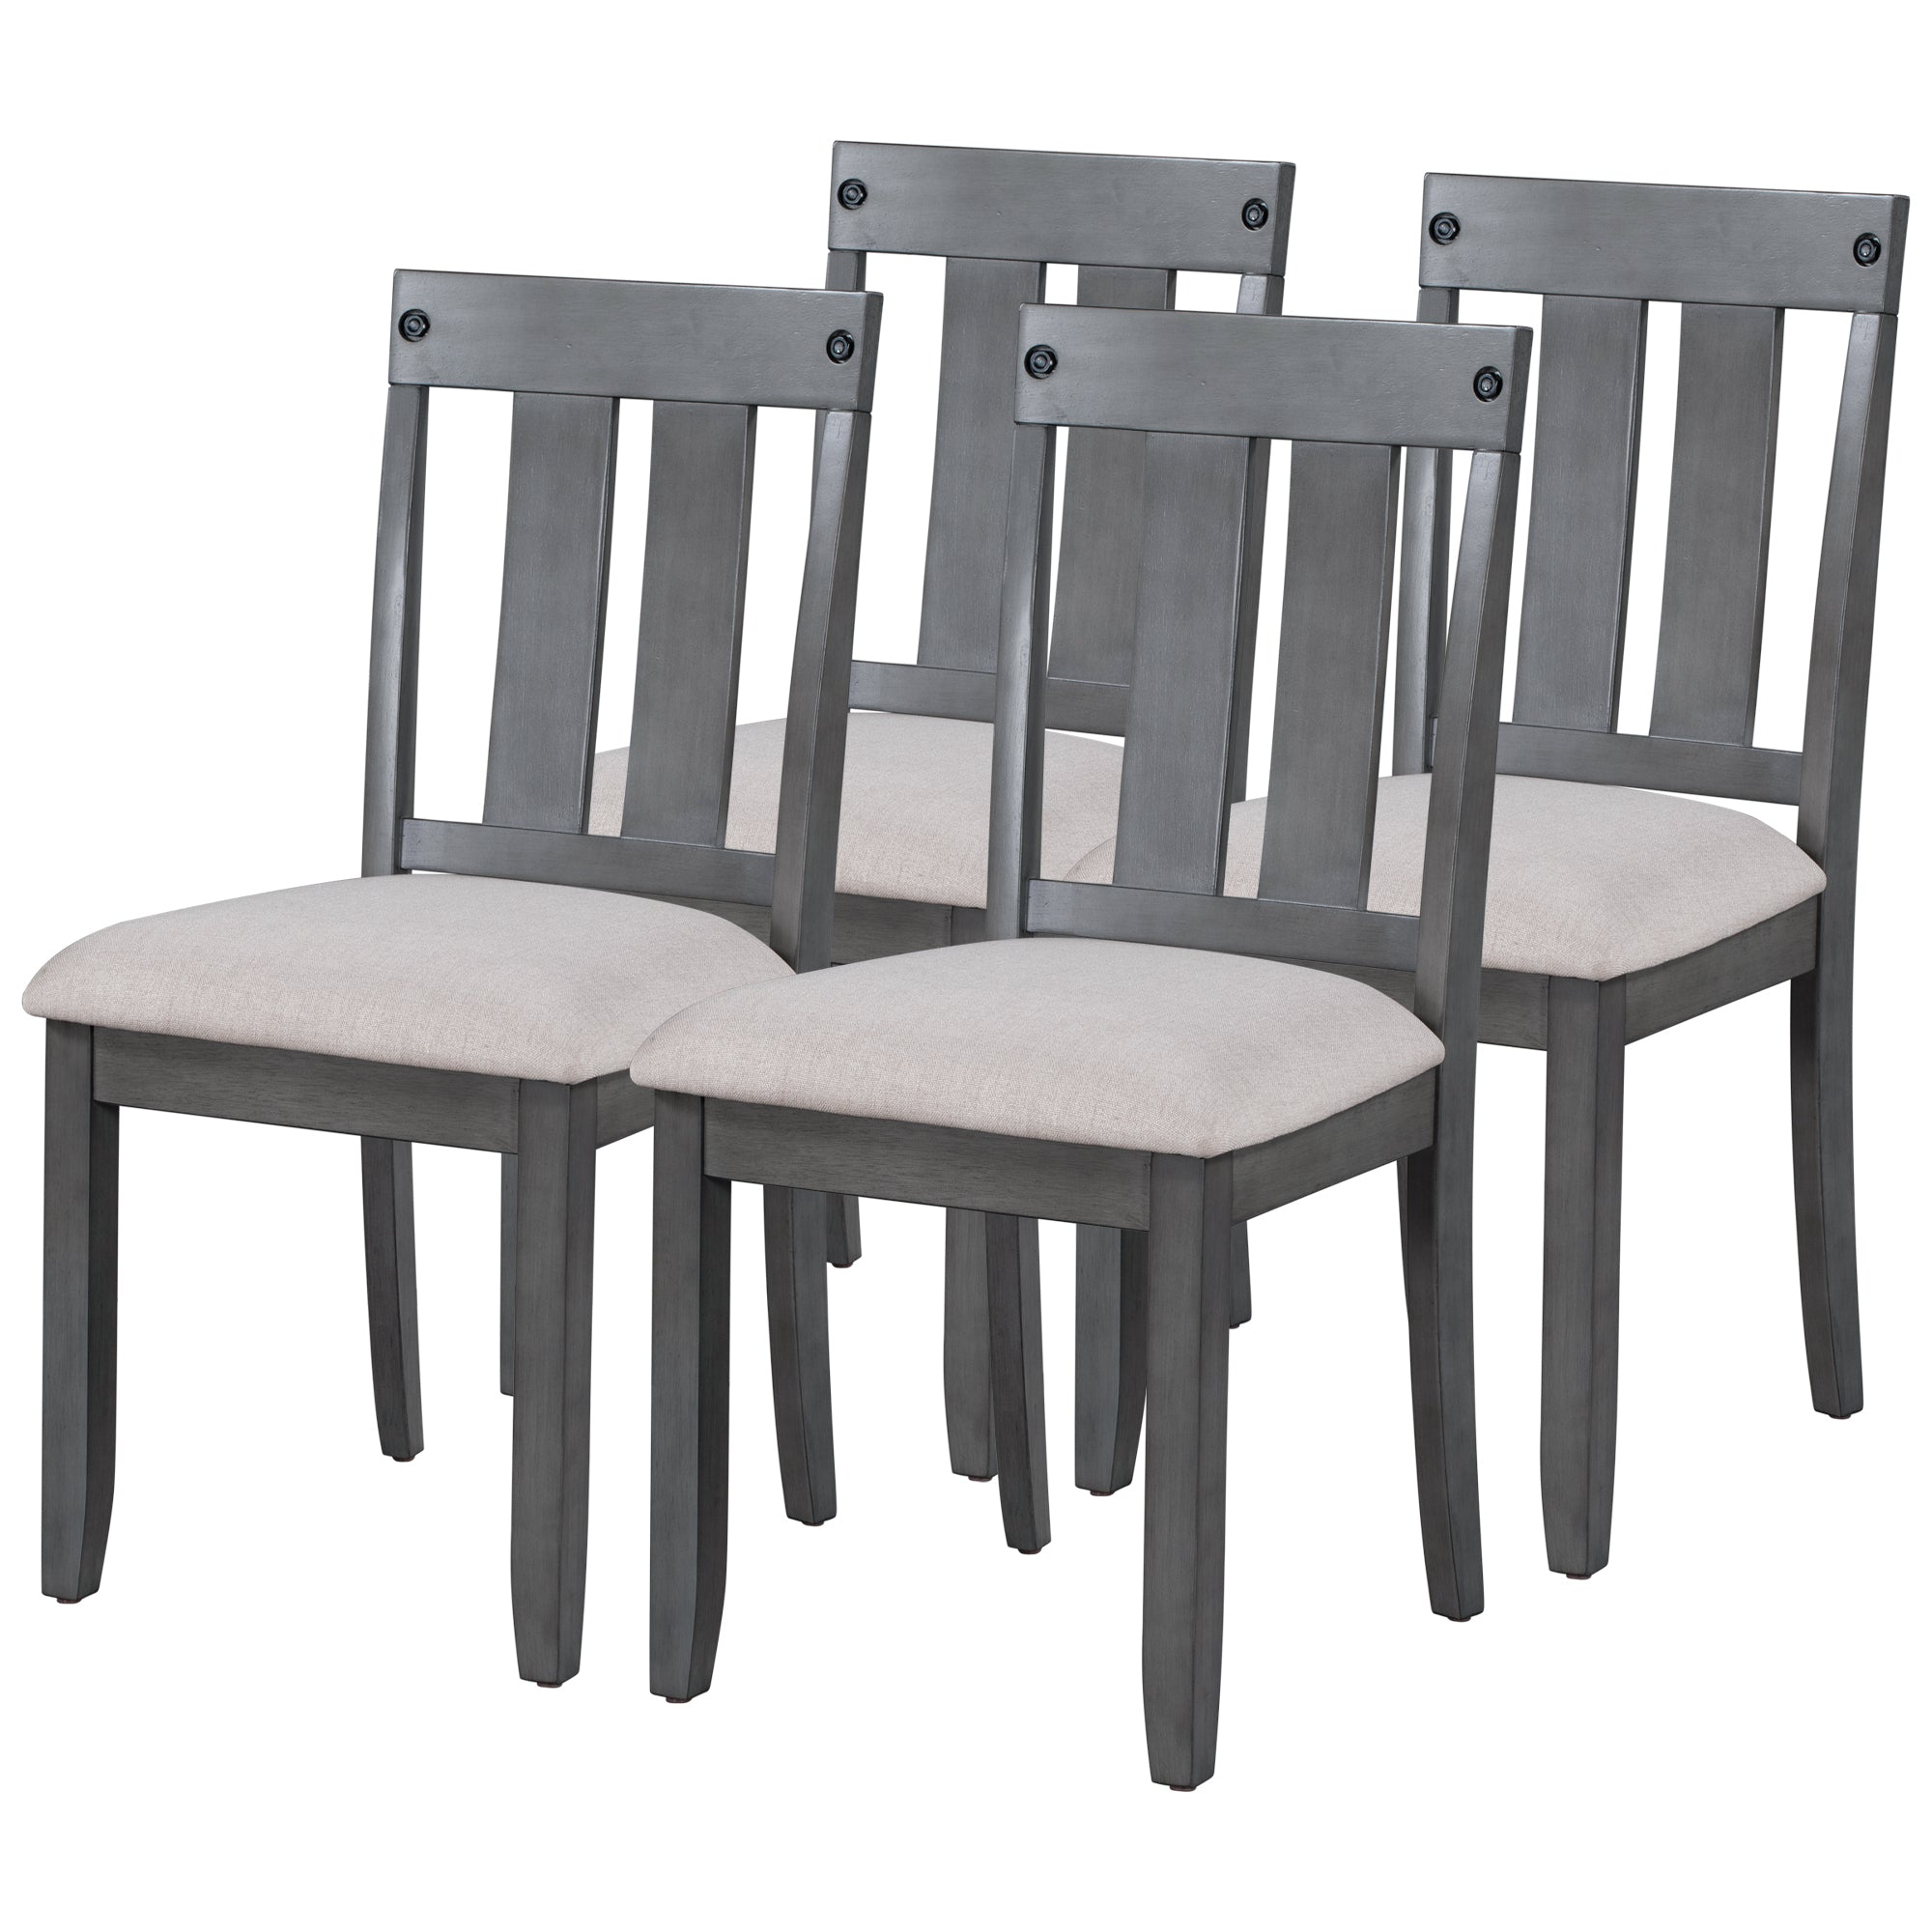 6-Piece Wooden Rustic Style Dining Set with Table, 4 Chairs & Bench (Gray)